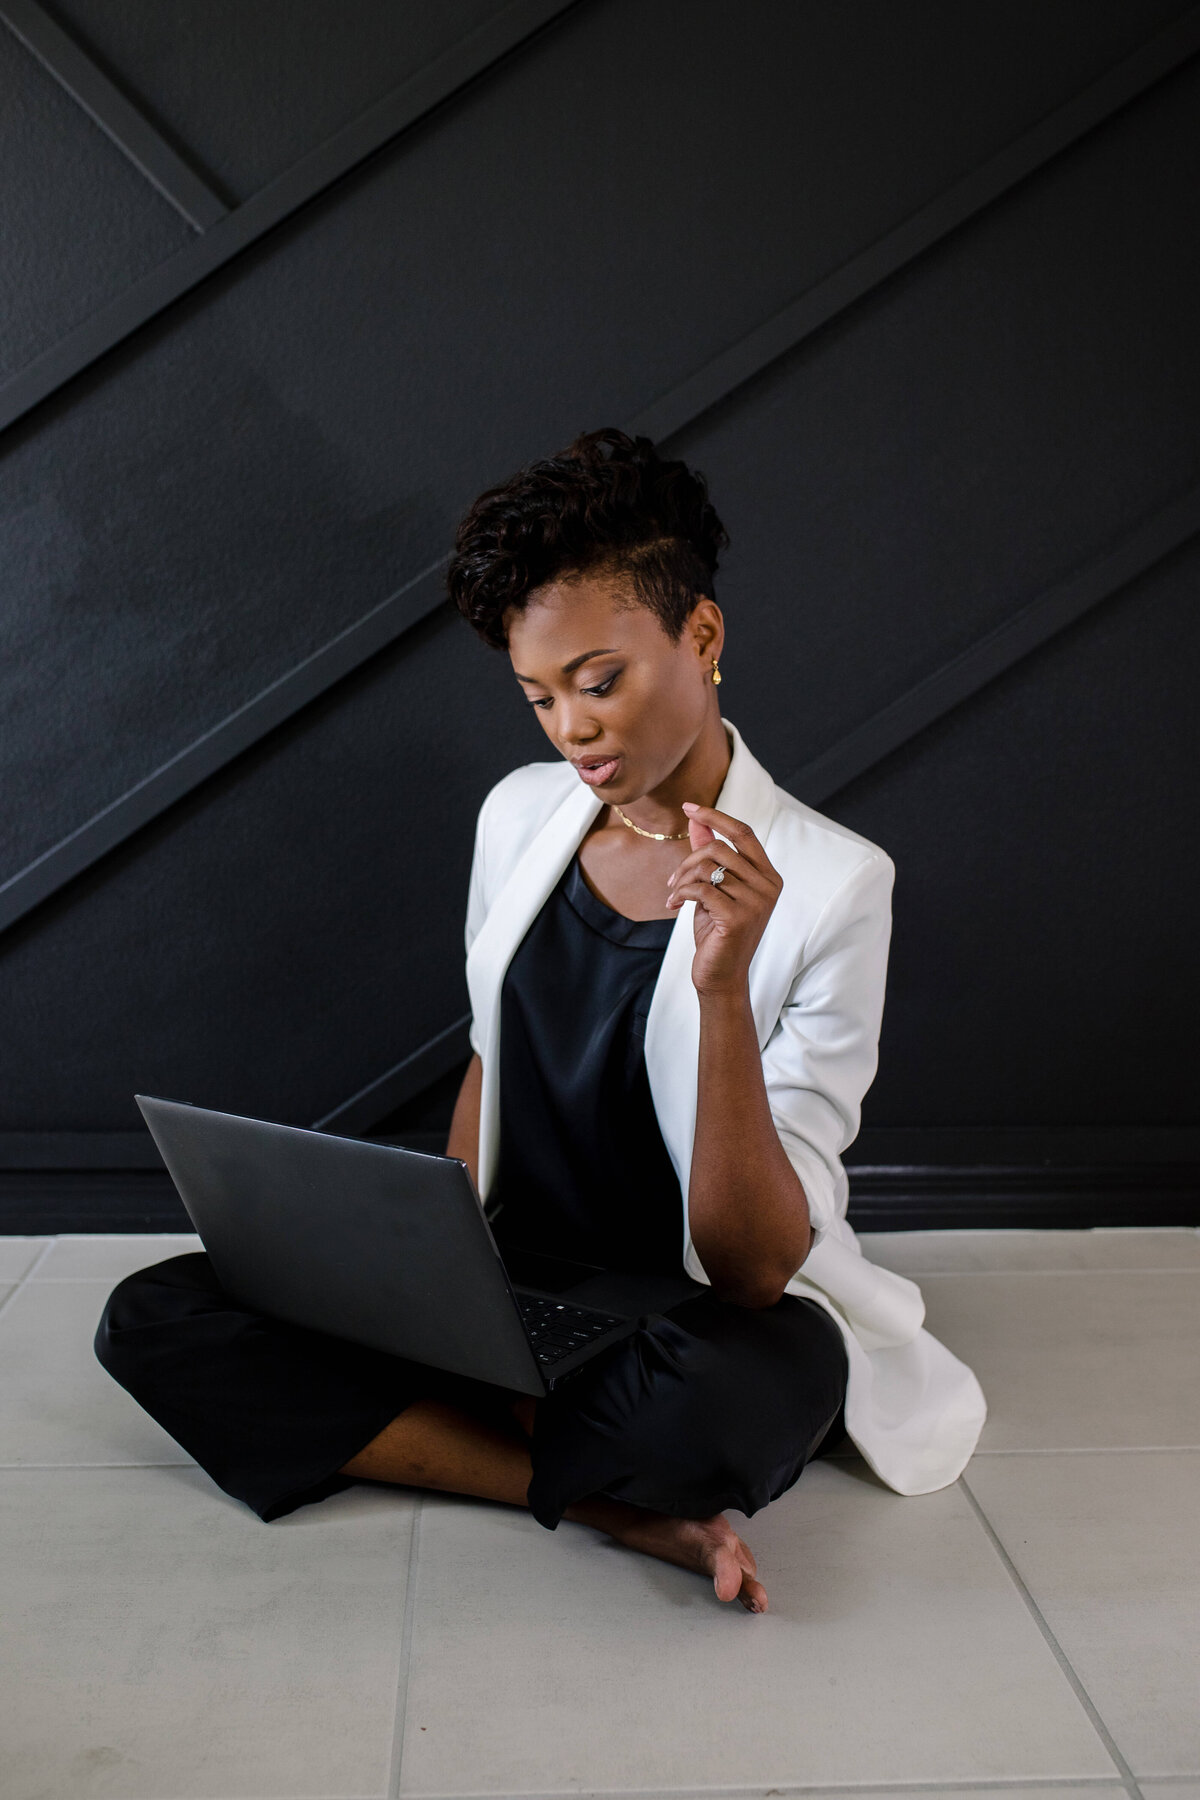 Brand photography with woman sitting on the floor crosslegged with her laptop on her lap as she poses for a branding photo shoot